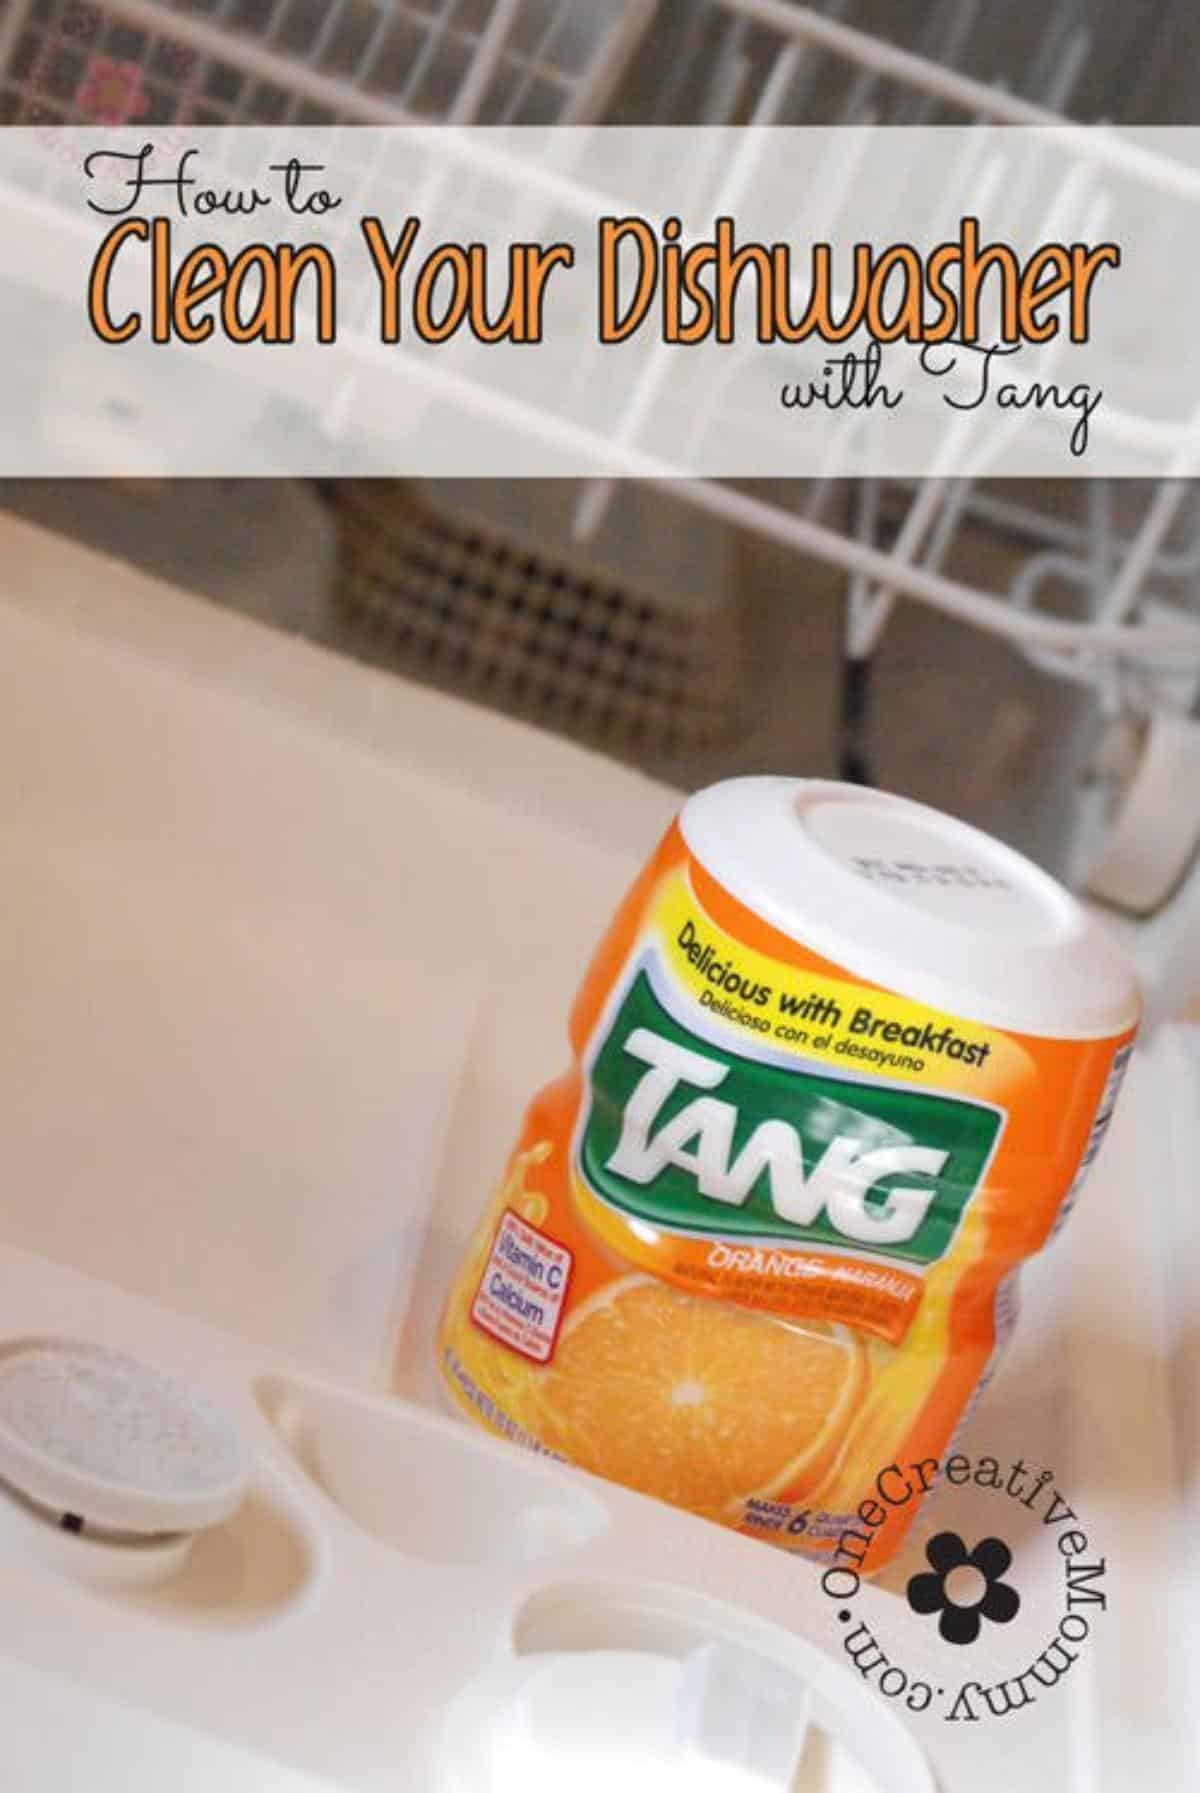 Cleaning dishwasher with tang.